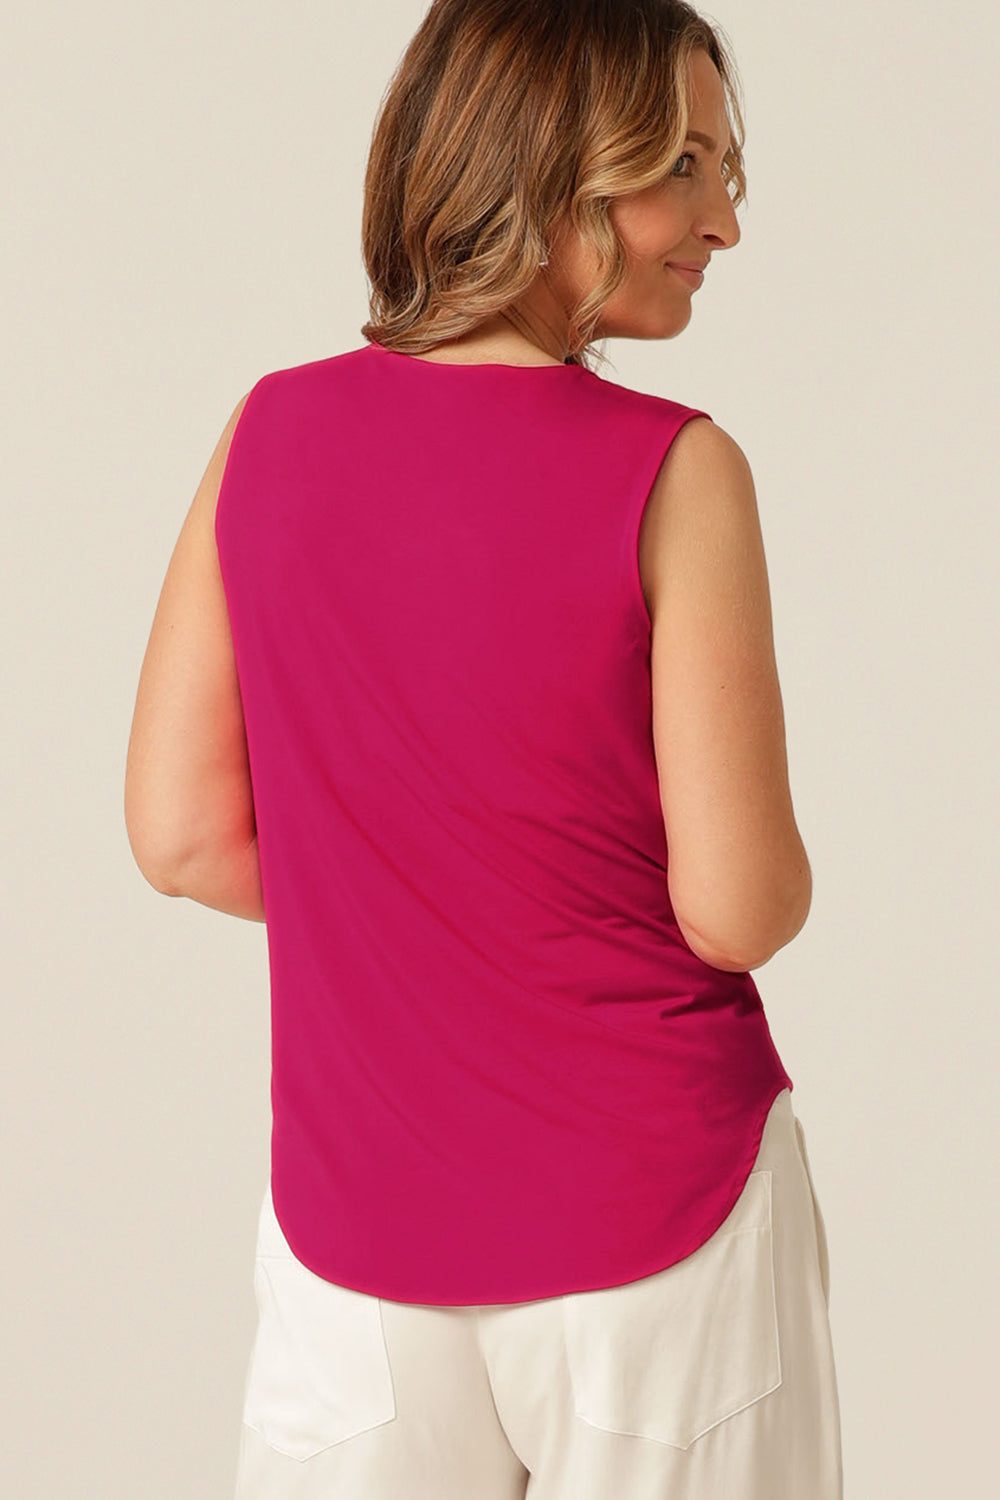 sleeveless bamboo jersey top with soft cowl-neck. Made in Australia for petite to plus size women.